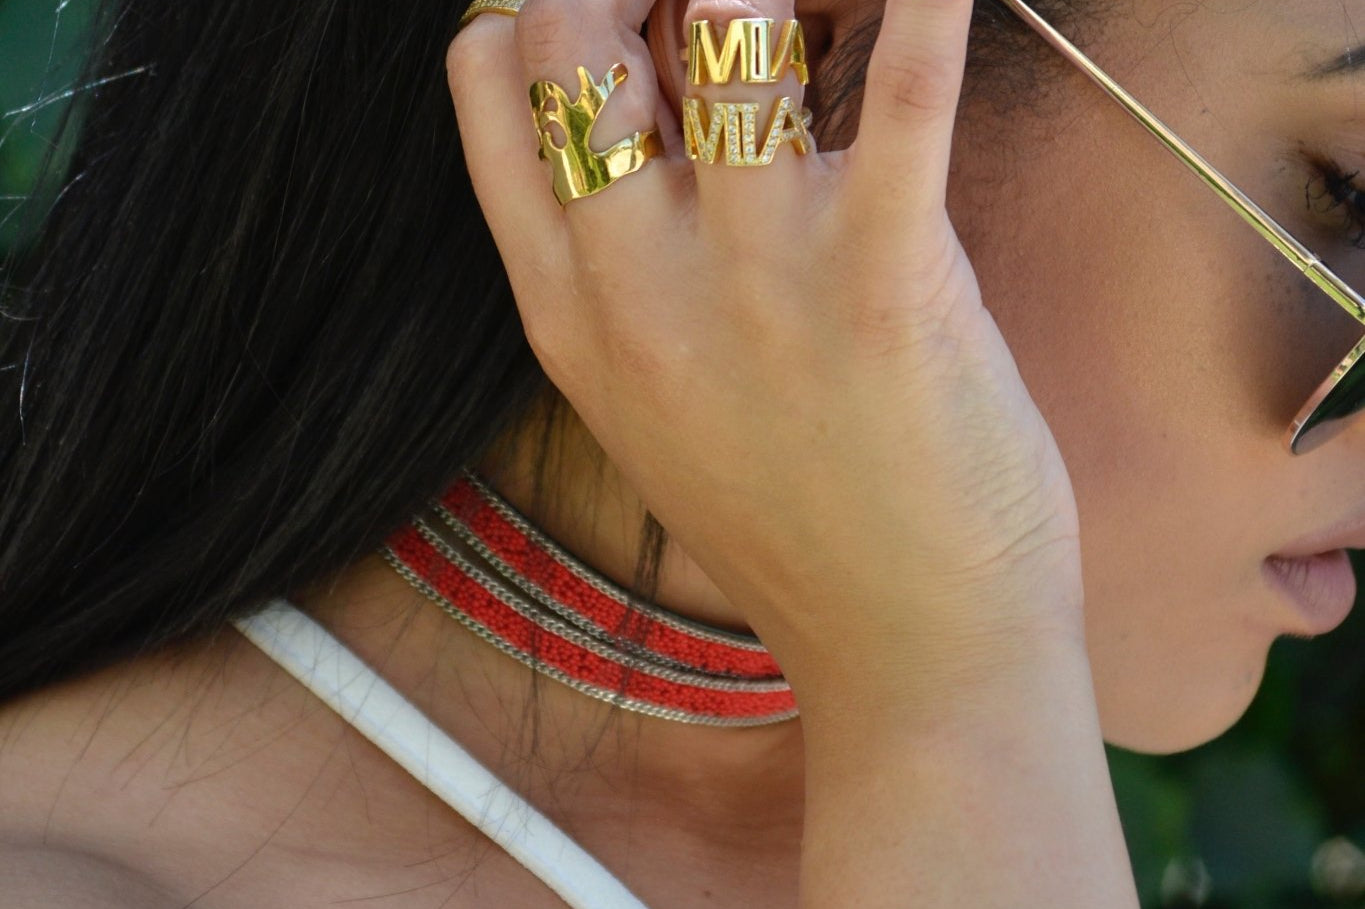 NAMEPLATE RING - KING ME Custom Jewelry by PG